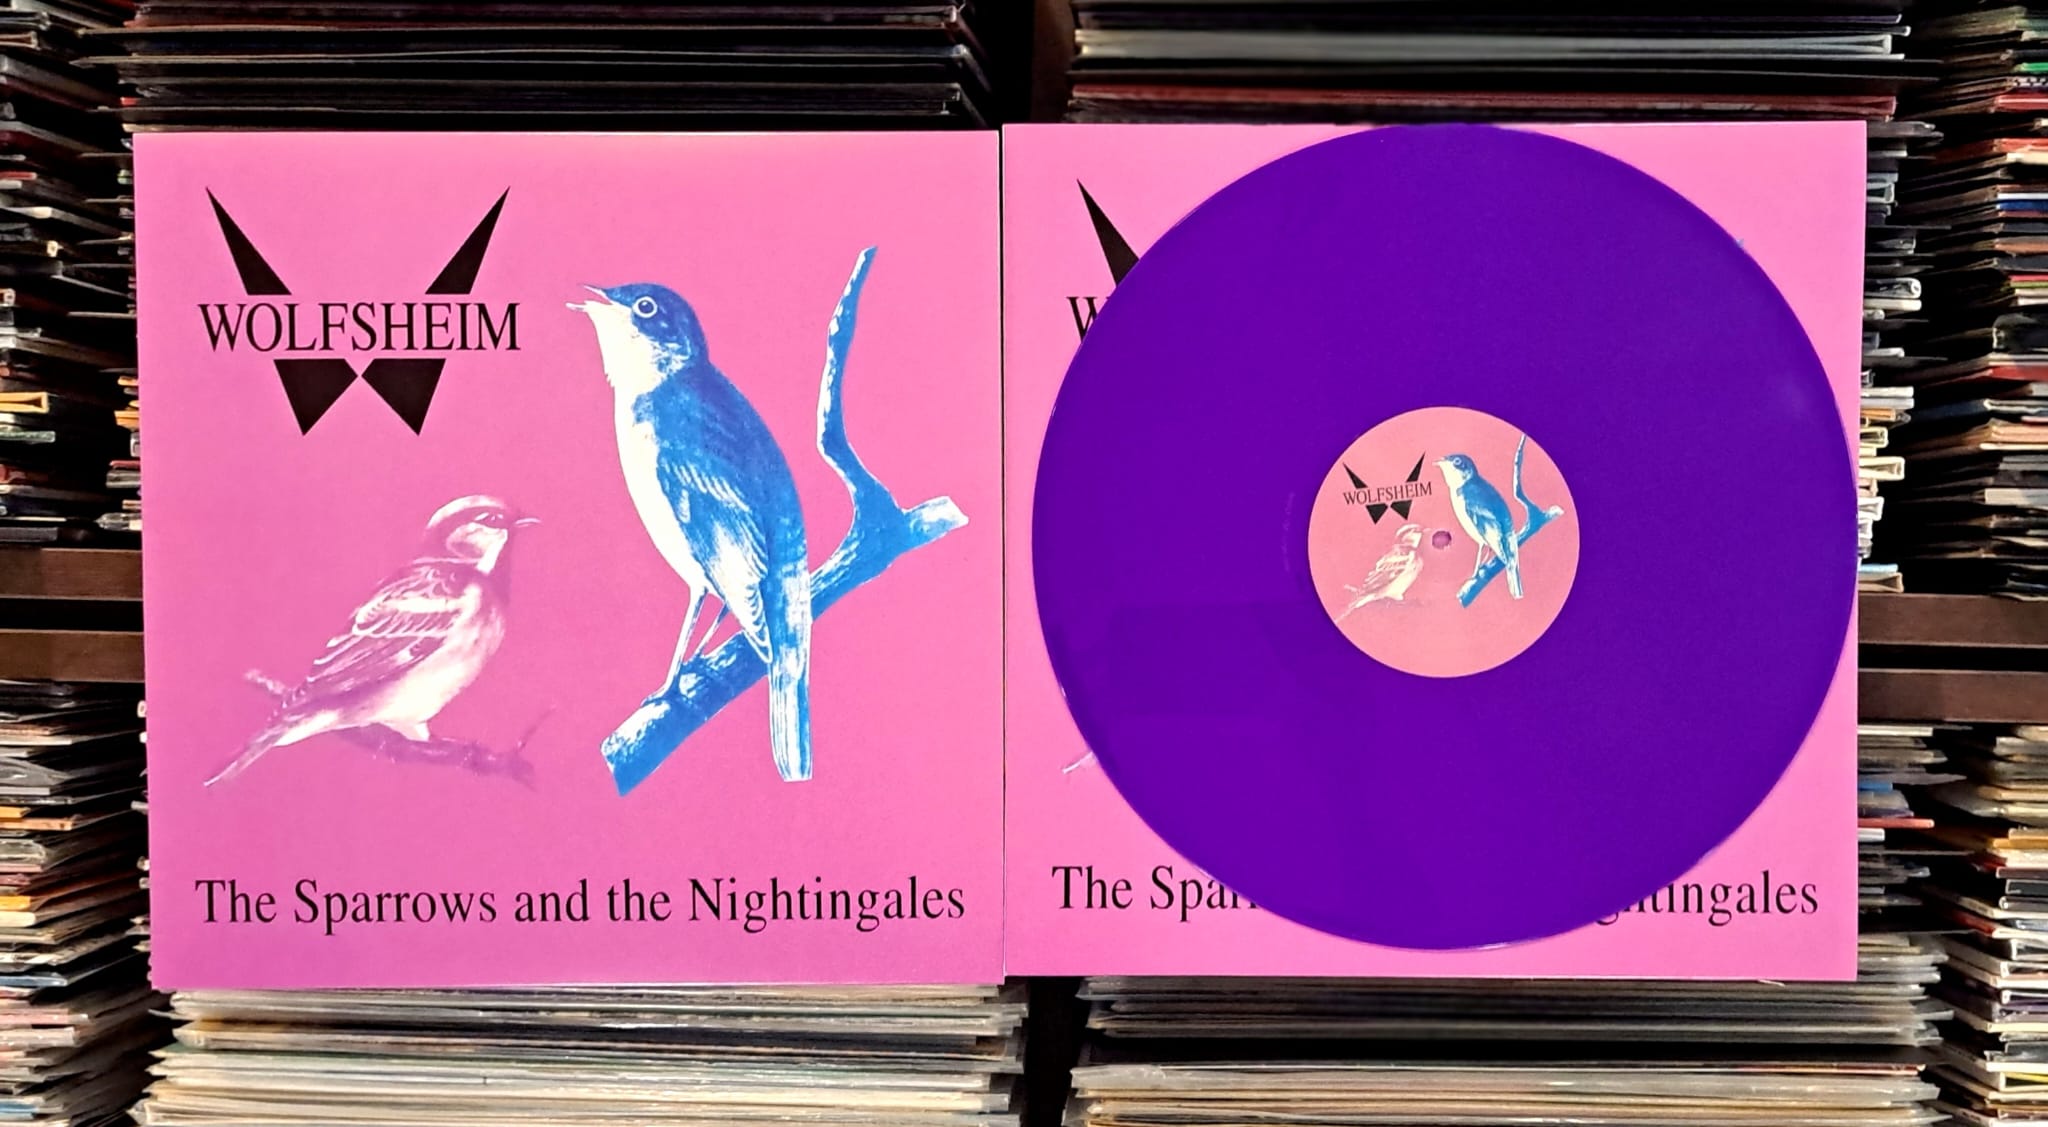 Wolfsheim "The Sparrows and the Nightingales" 12" 🟣 Magenta.